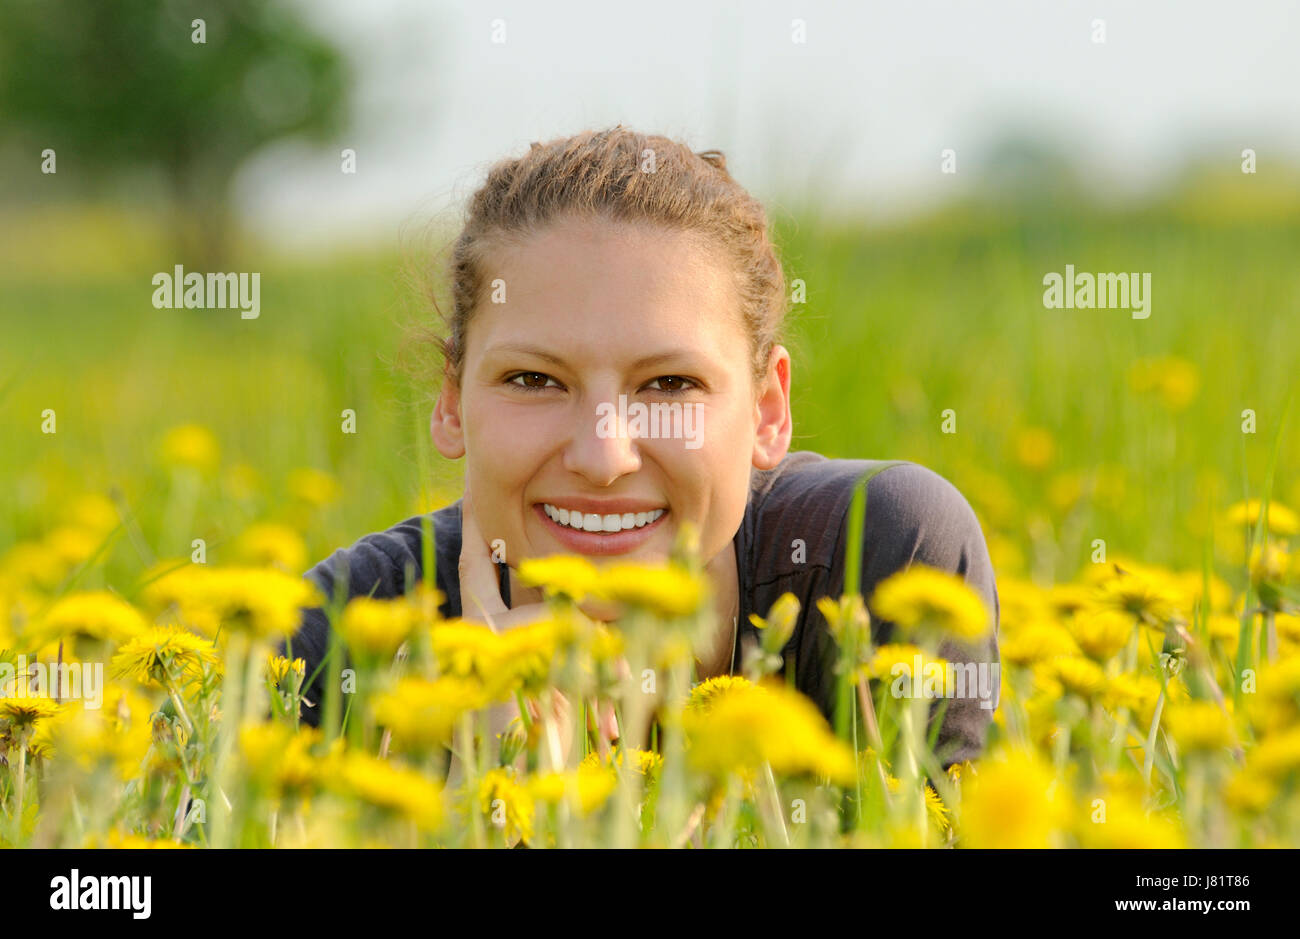 young woman on a flower meadow Stock Photo